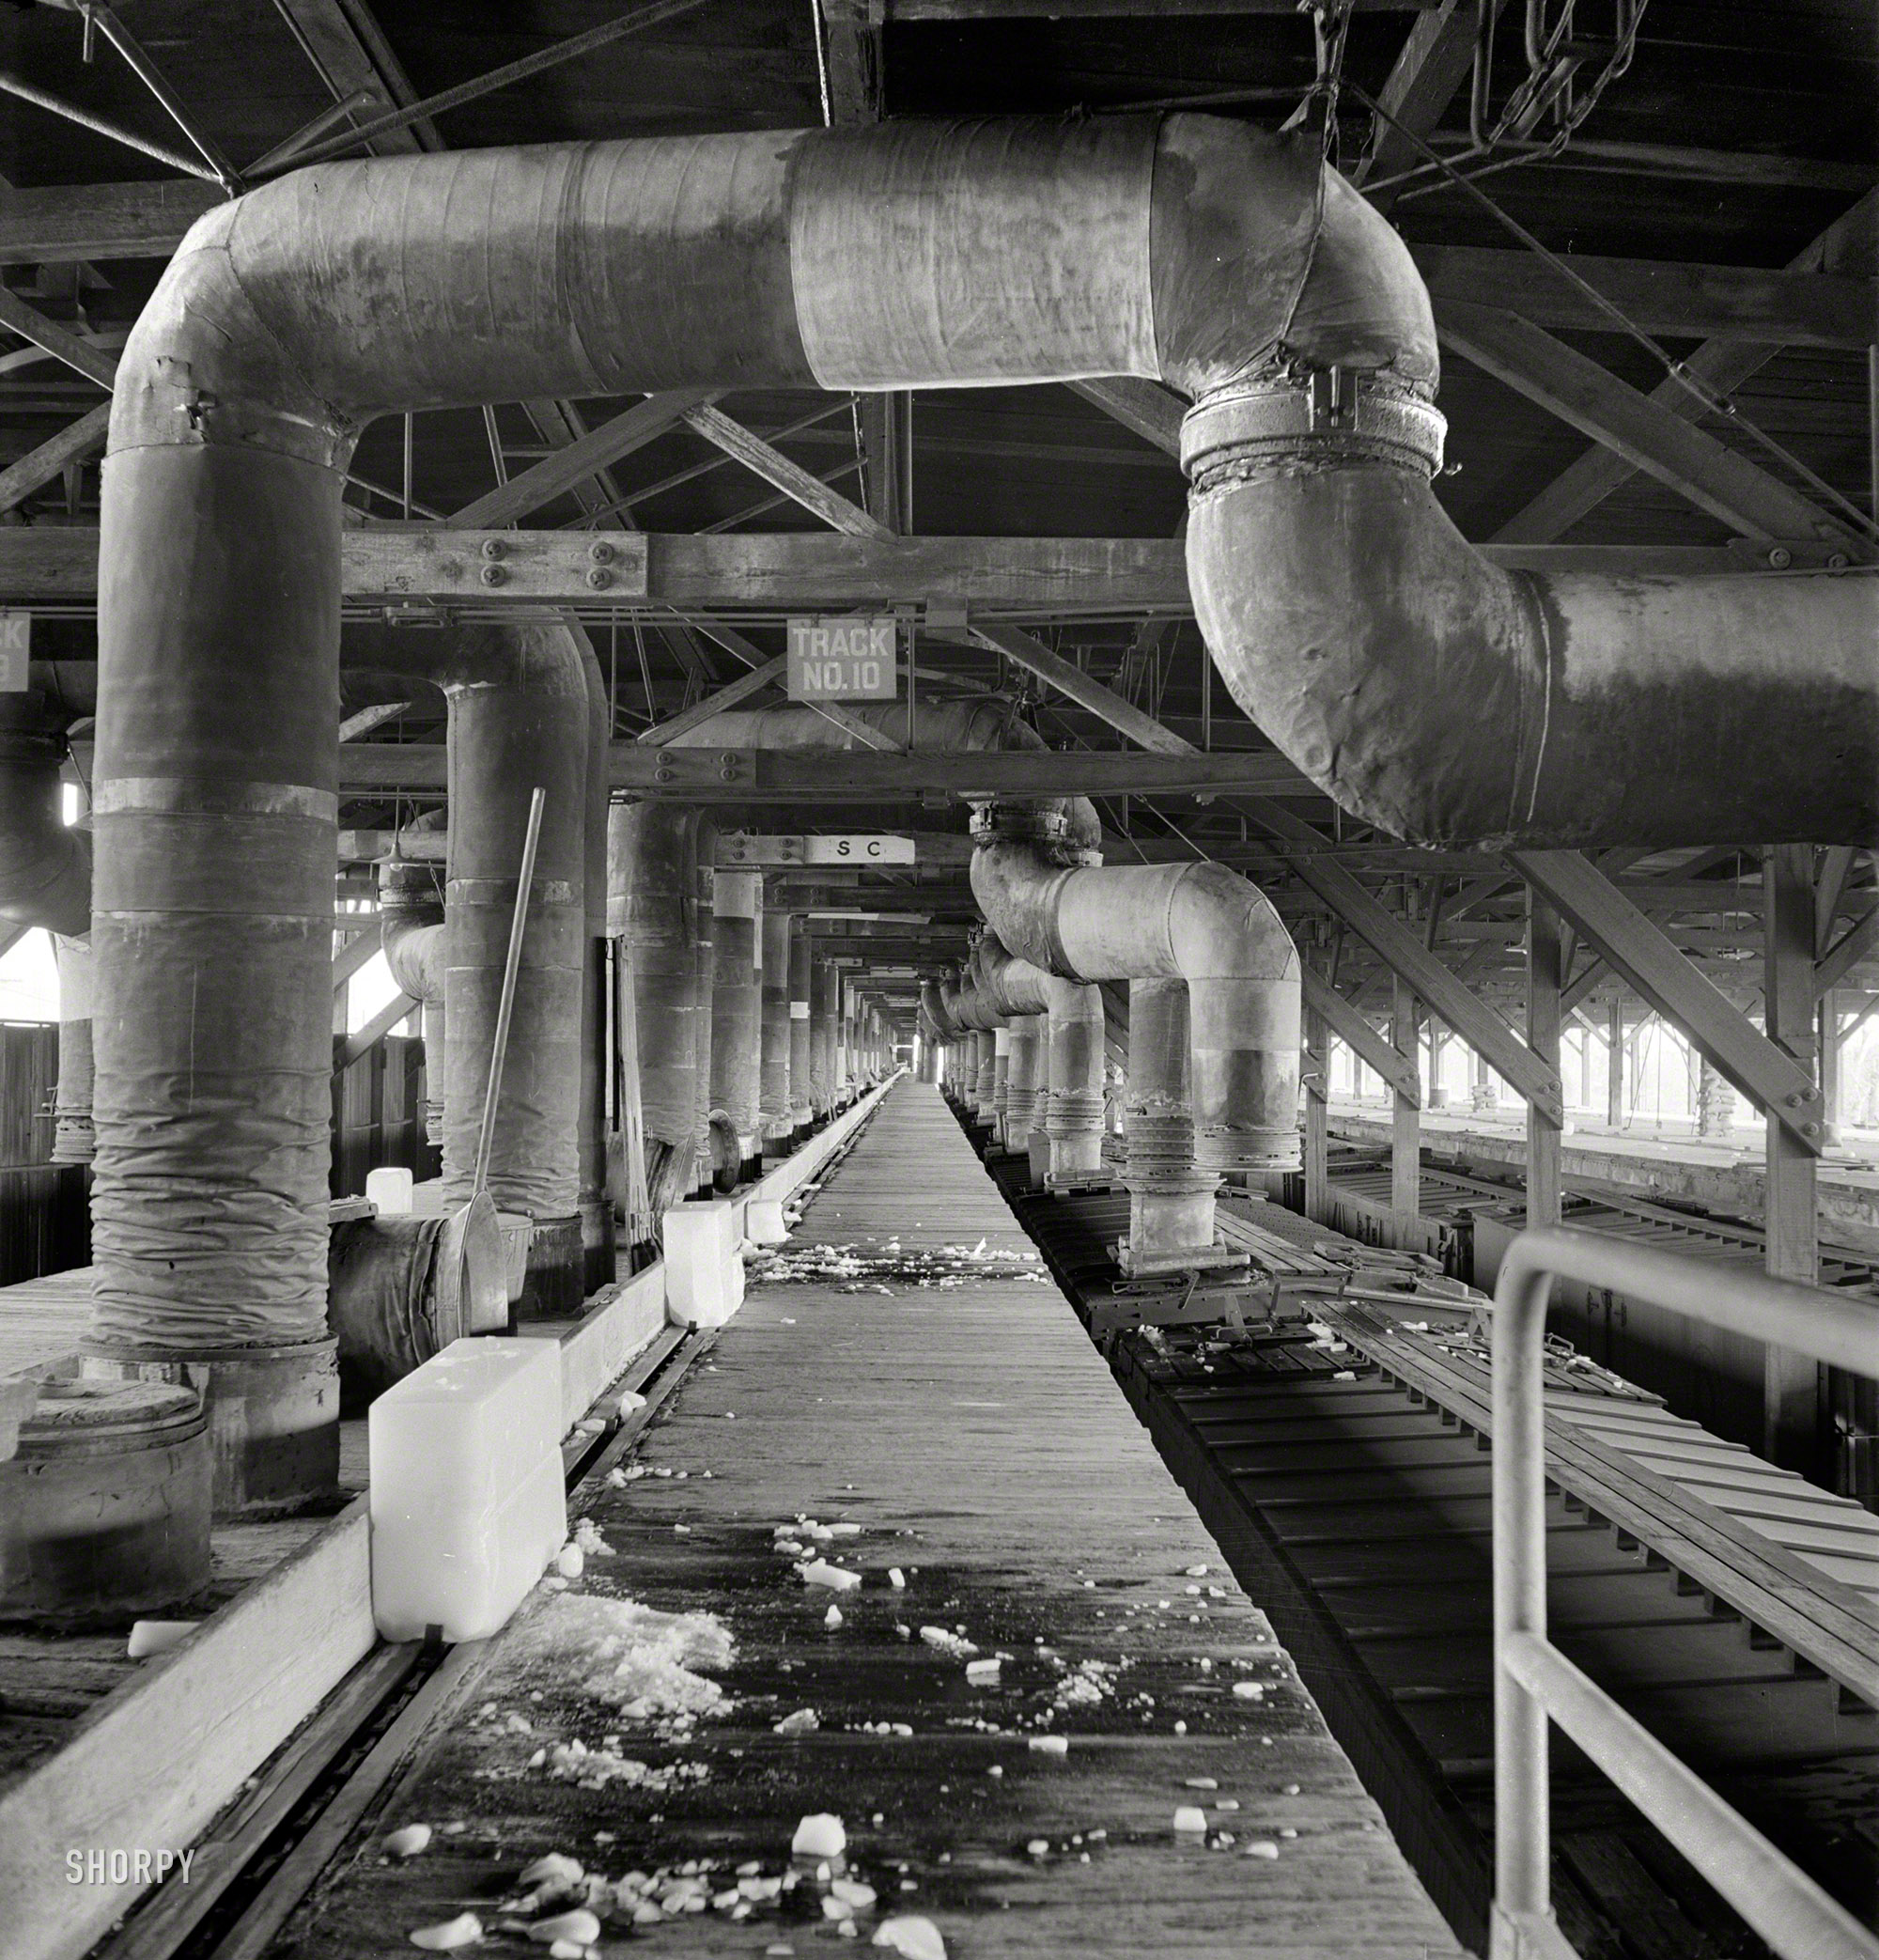 March 1943. "San Bernardino, California. Cars being precooled at the ice plant. Air at a temperature of 20 degrees Fahrenheit is blown through the cars for 20 minutes in one direction, then in the other. Shippers specify the number of hours precooling required for their product." Photo by Jack Delano. View full size.